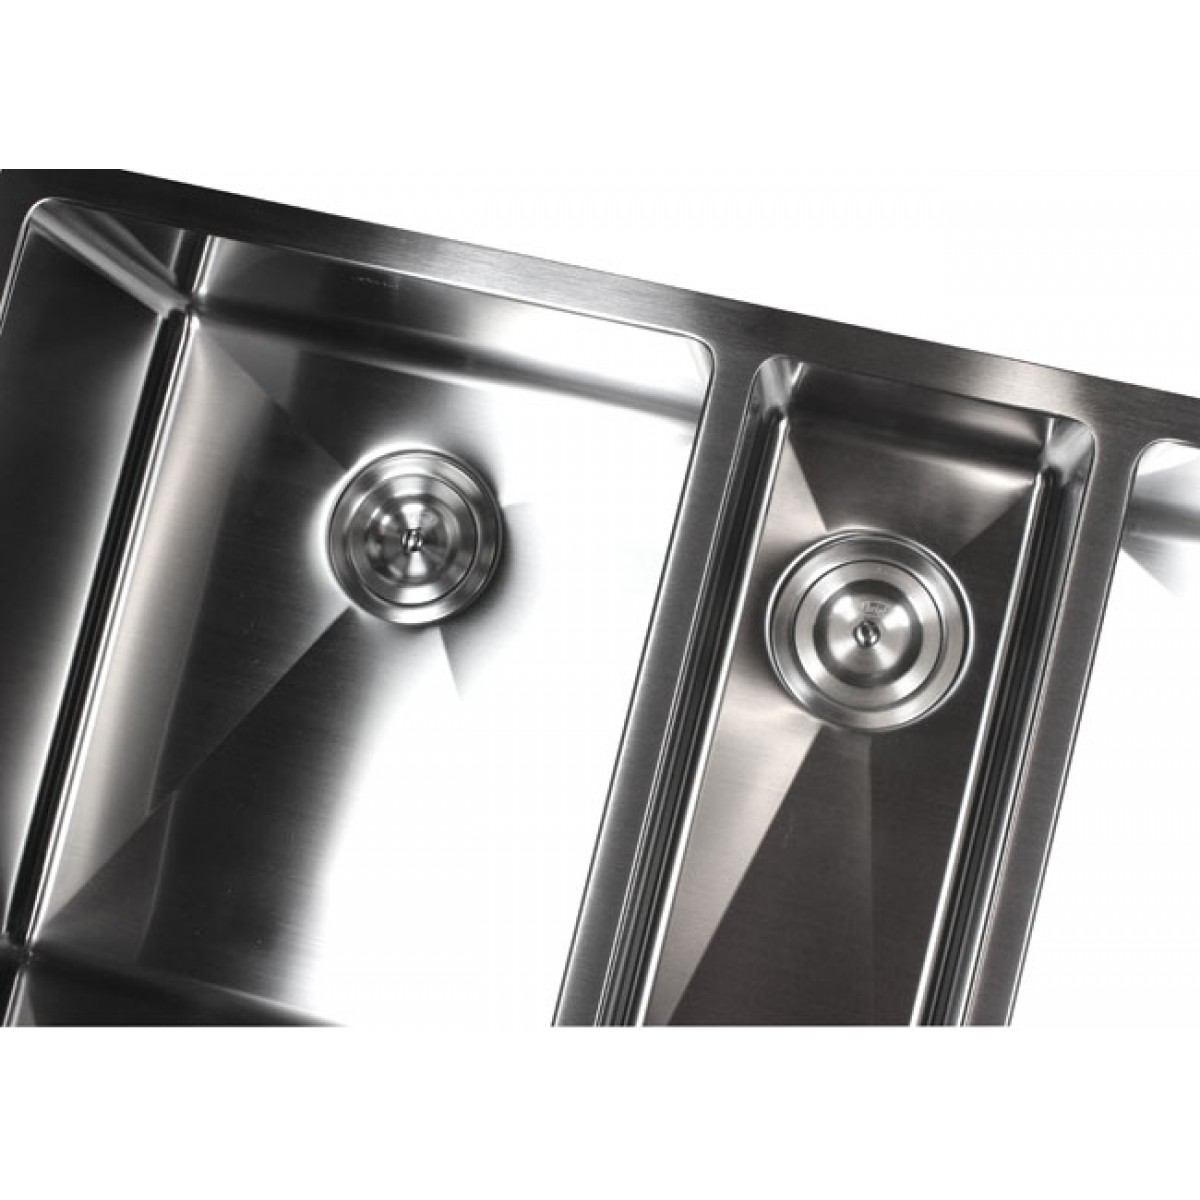 42 Inch Stainless Steel Undermount Triple Bowl Kitchen Sink 15mm Radius 42 Inch Stainless Steel Sink